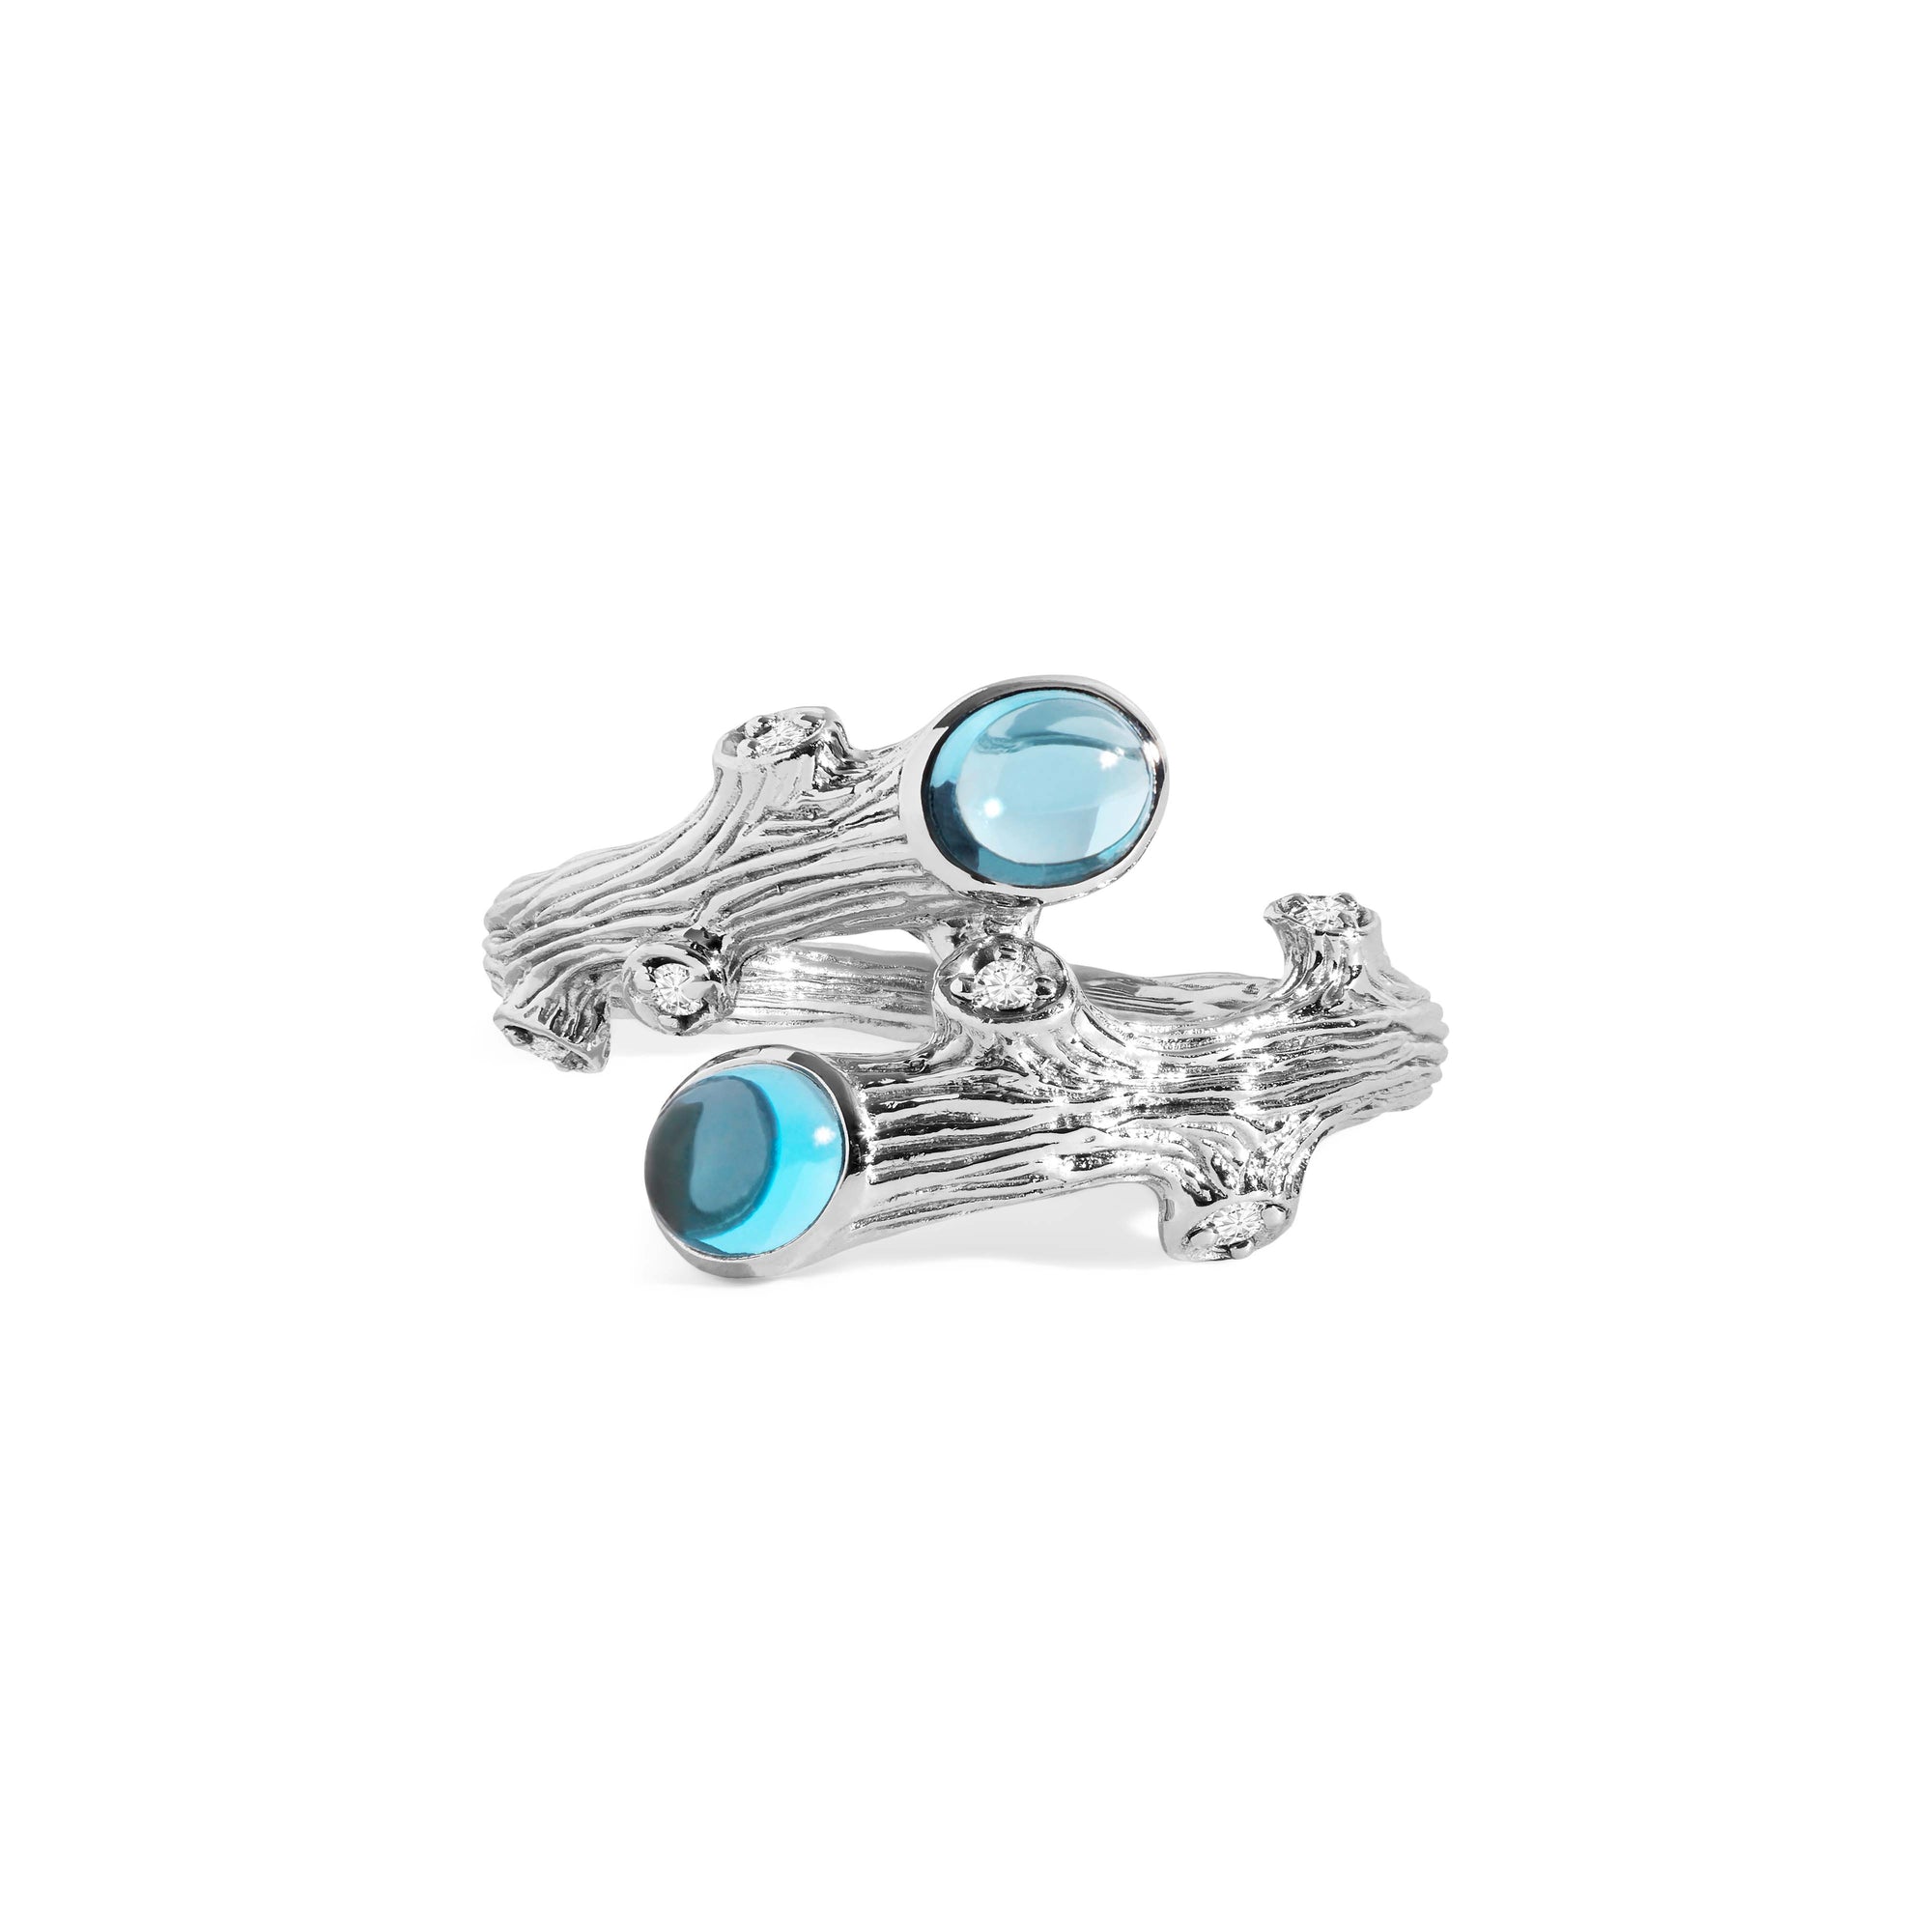 Michael Aram Enchanted Forest Ring with Blue Topaz and Diamond